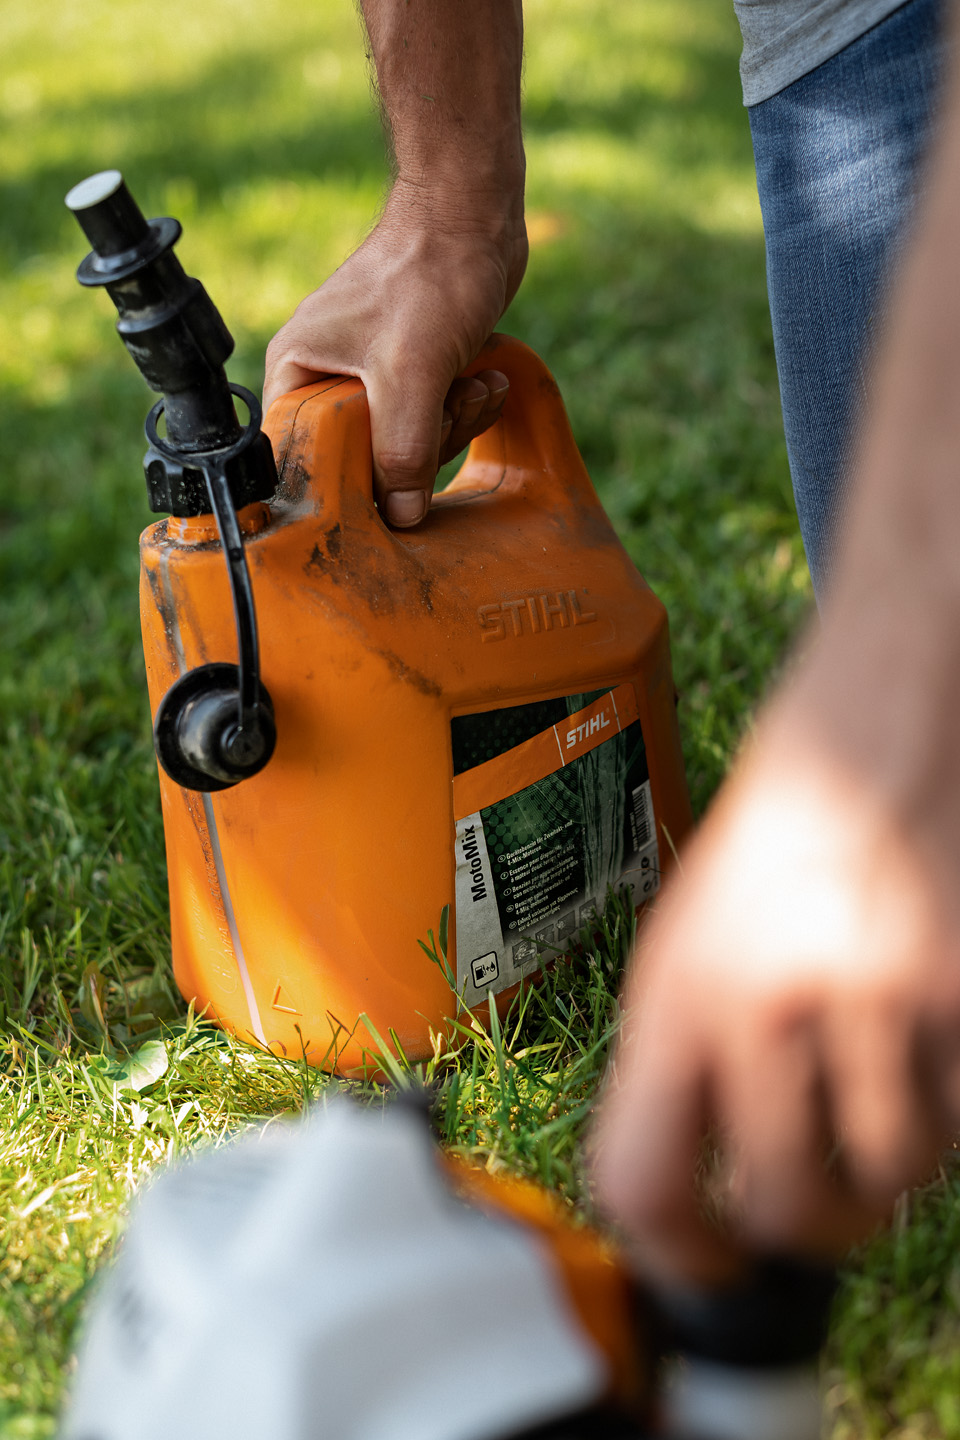 A dirty canister of STIHL MotoMix fuel mix on some grass, with a hand opening the fuel cap of a tool in the foreground